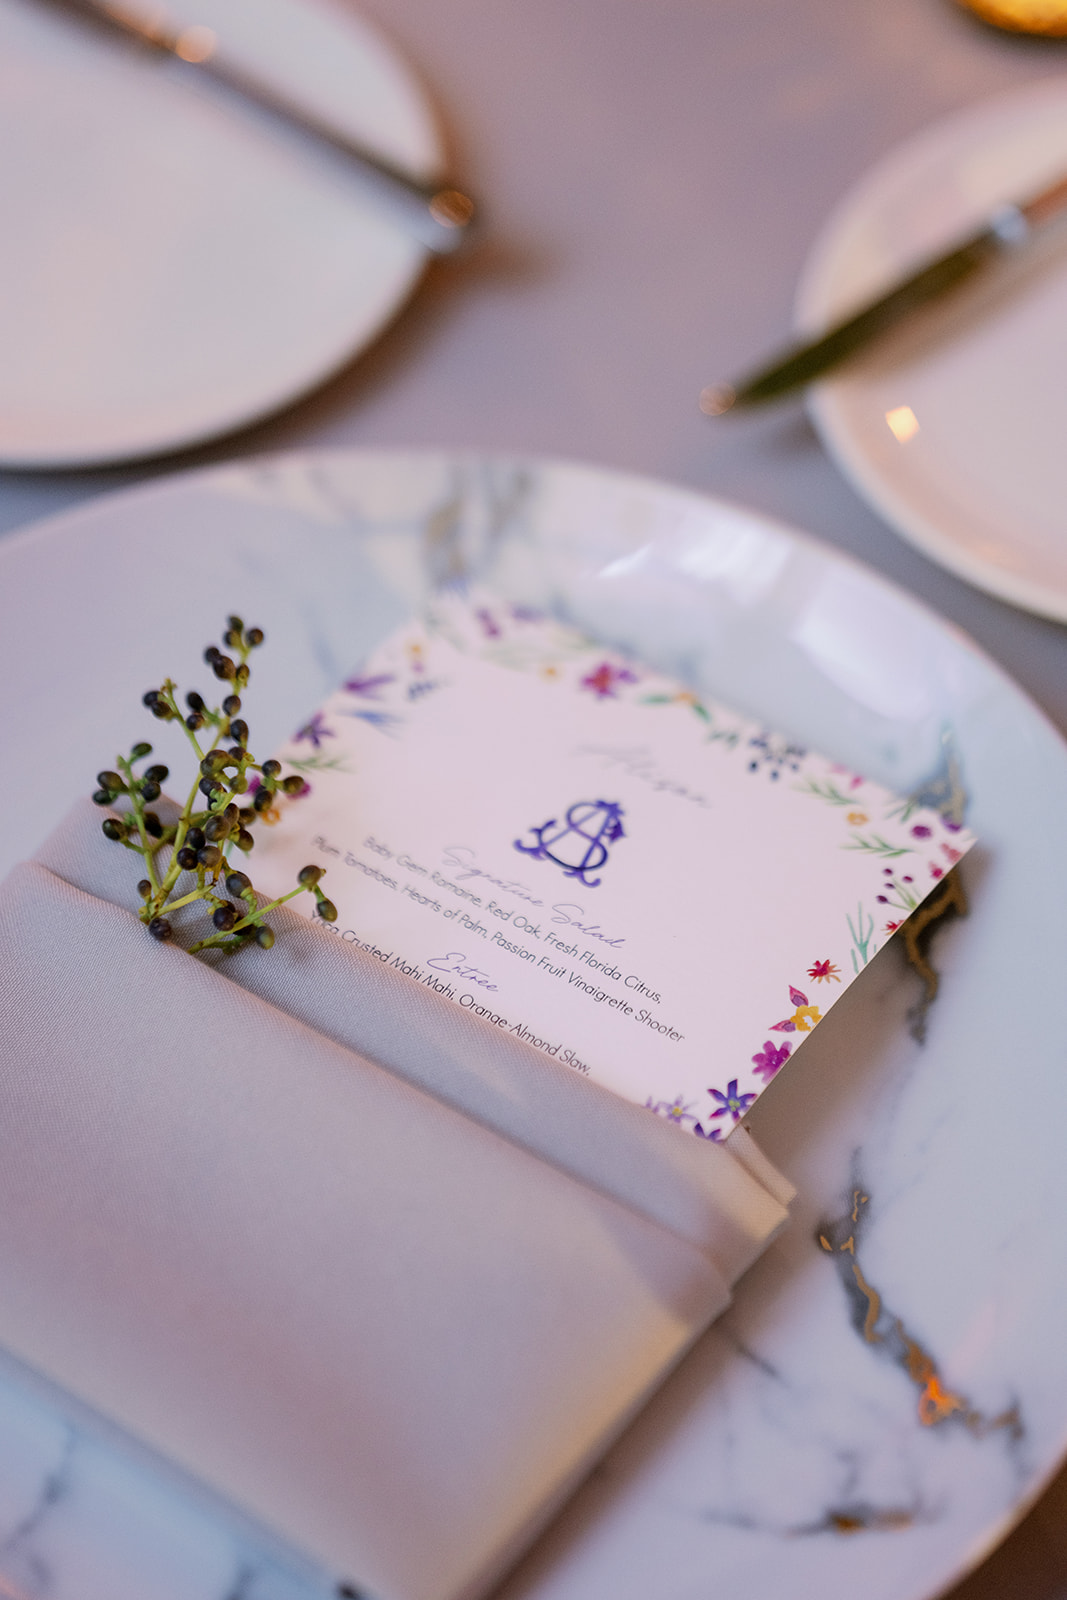 Wedding table place setting and menu.